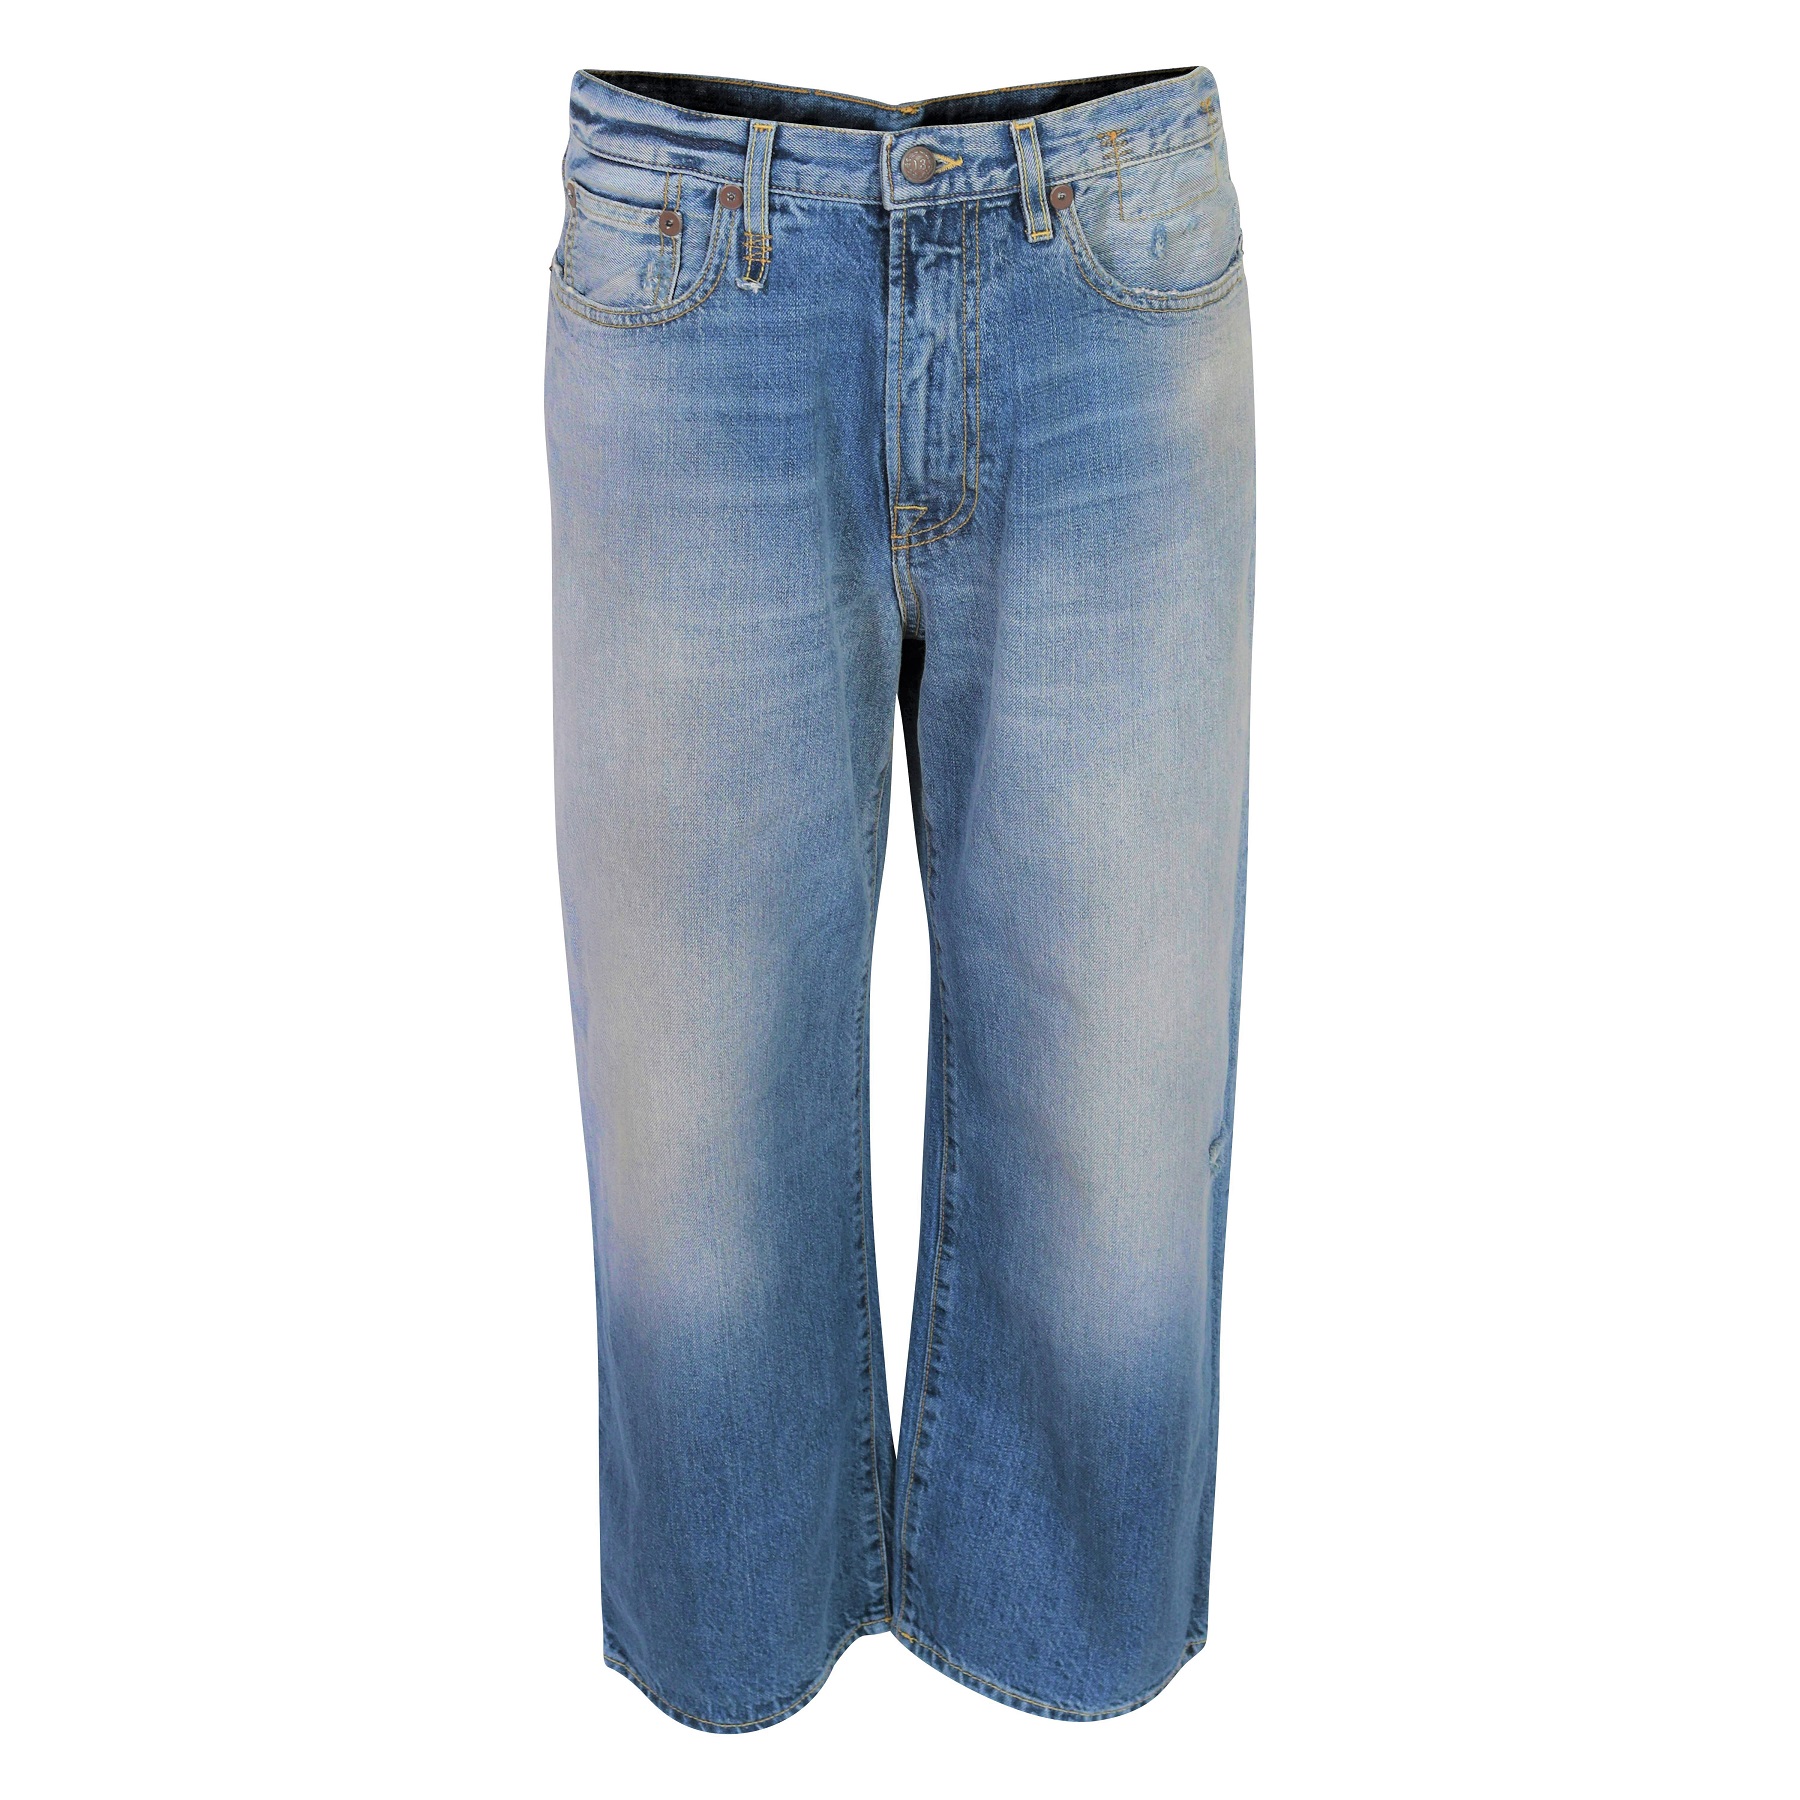 R13 Ankled D'Arcy Jeans in Irving Blue 29